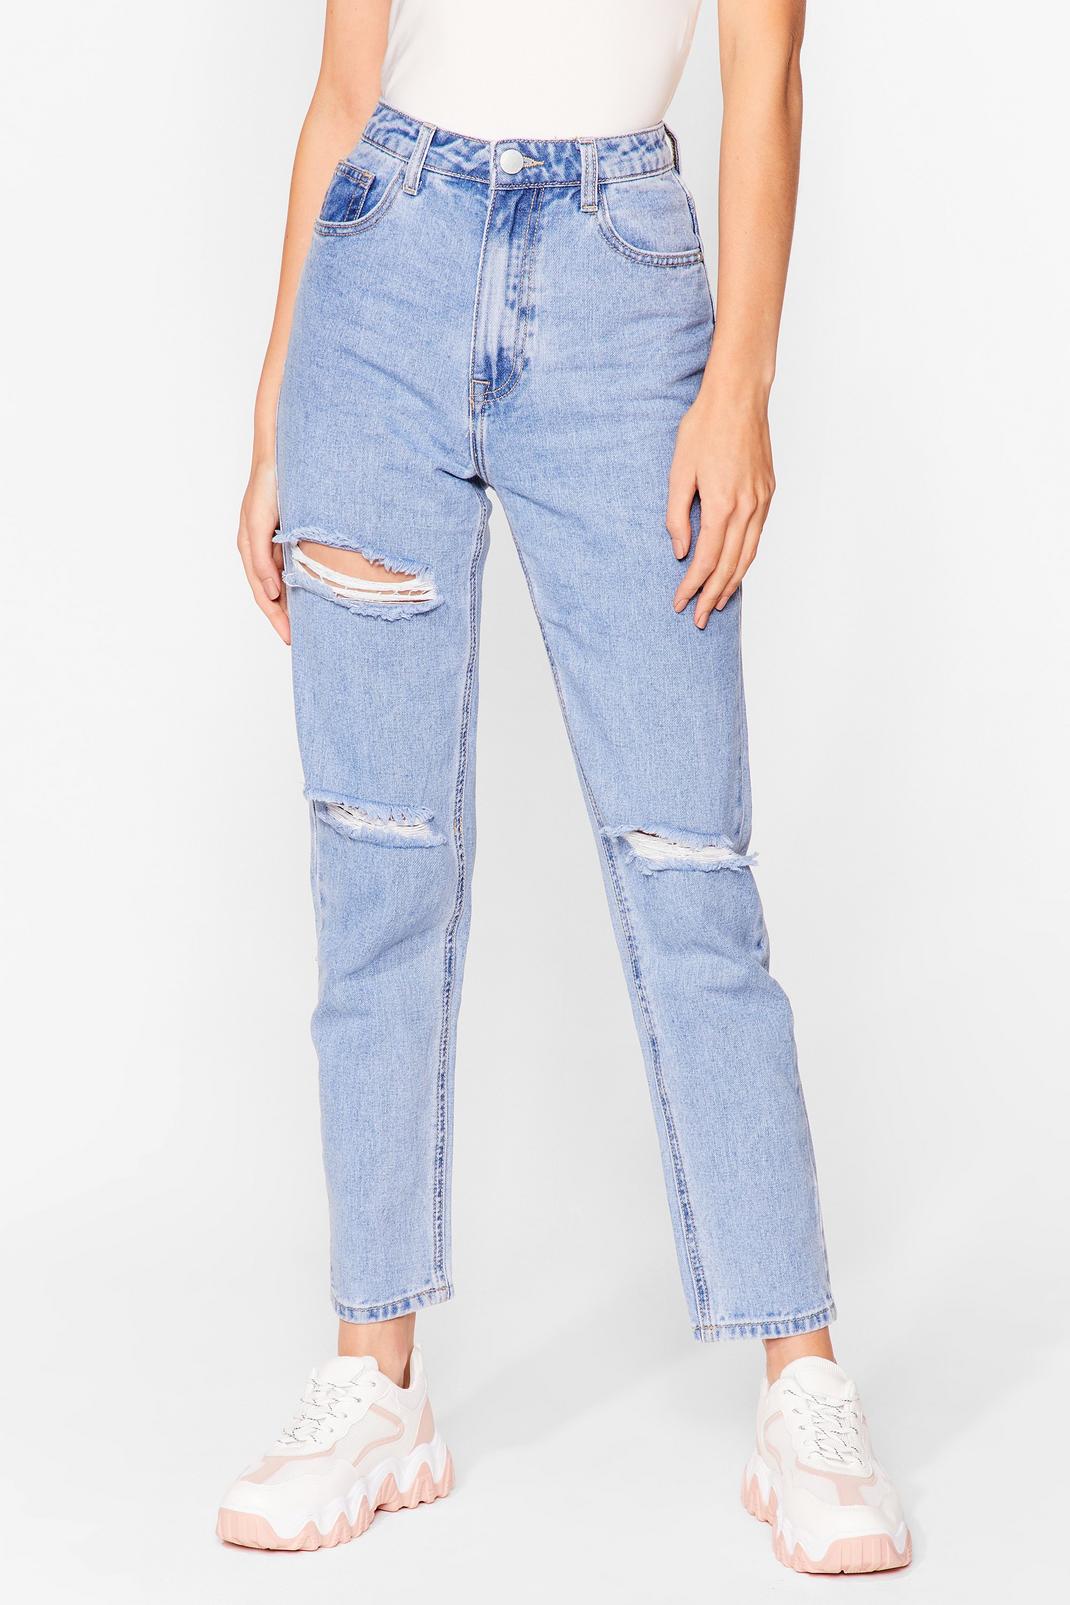 Wash Us Work It Distressed Mom Jeans image number 1